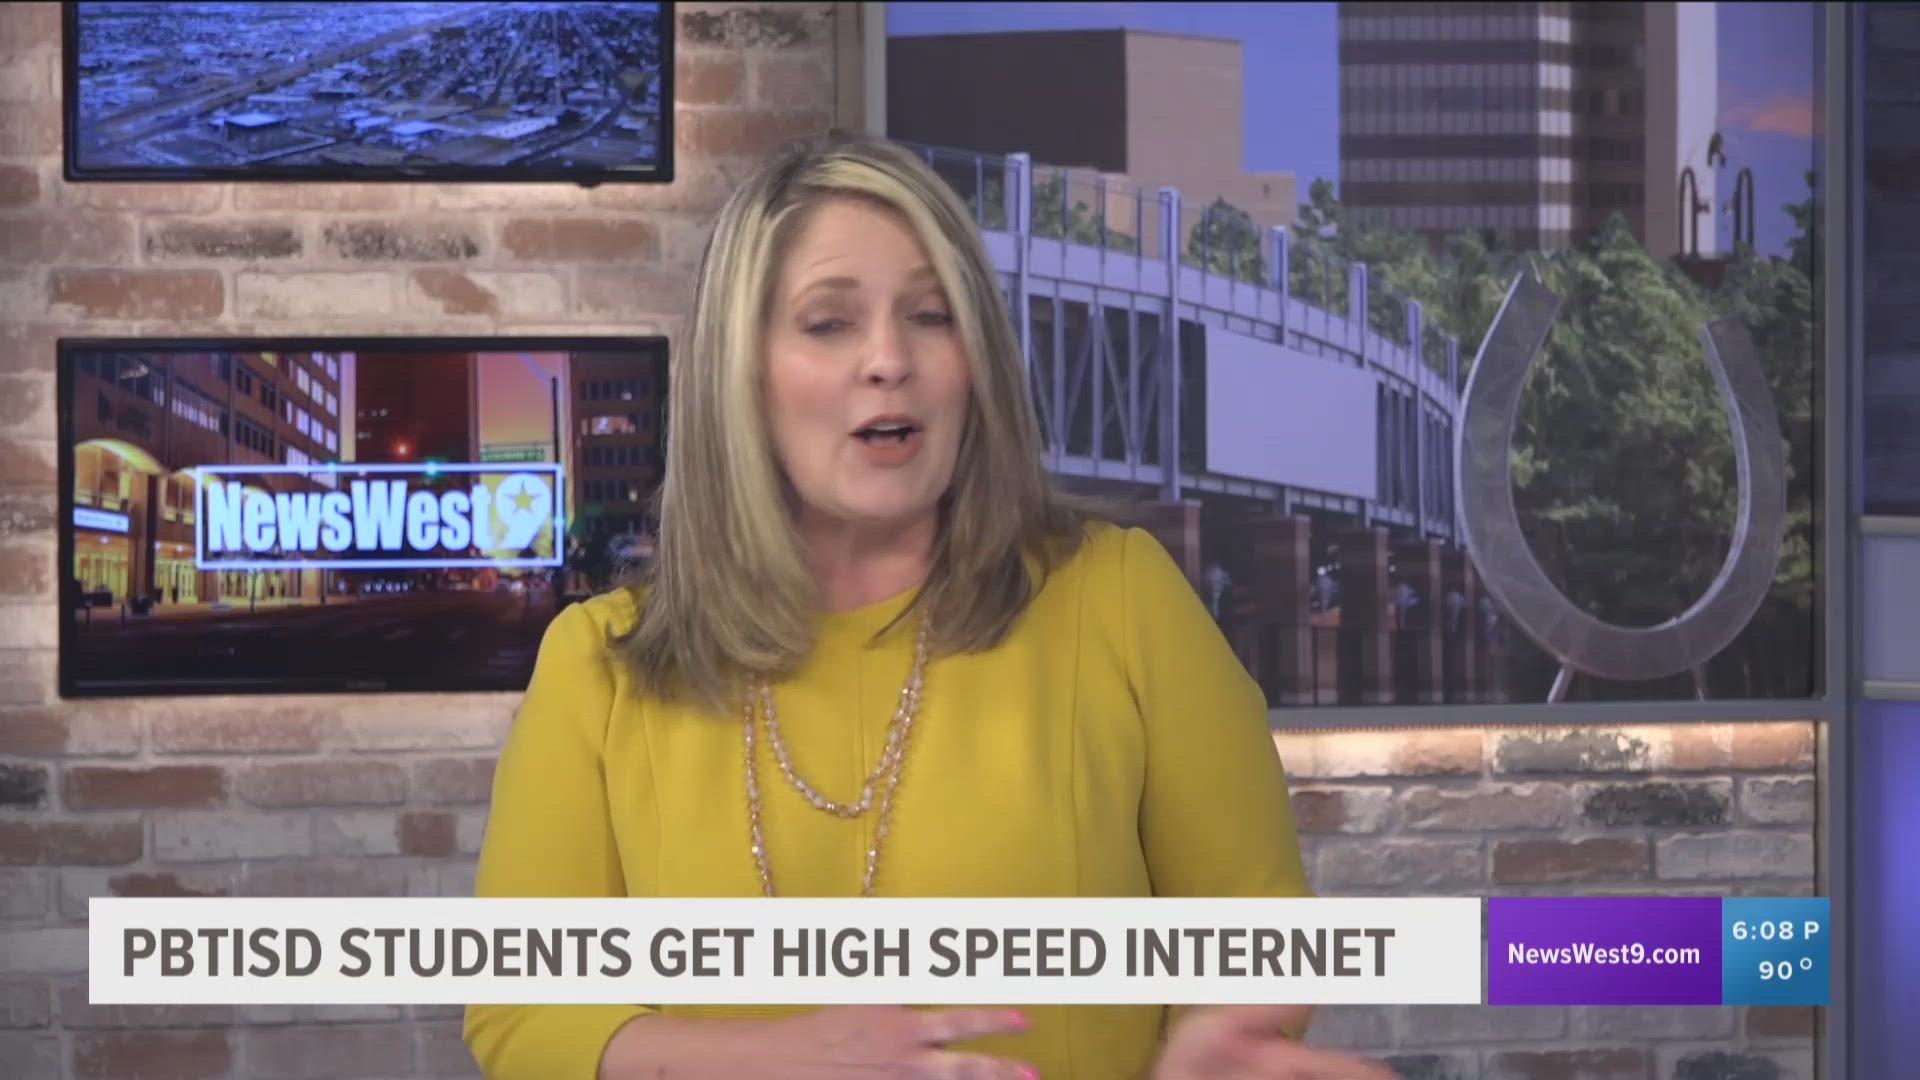 According to the Texas Education Agency, around 1.8 million students don't have reliable internet access at home.